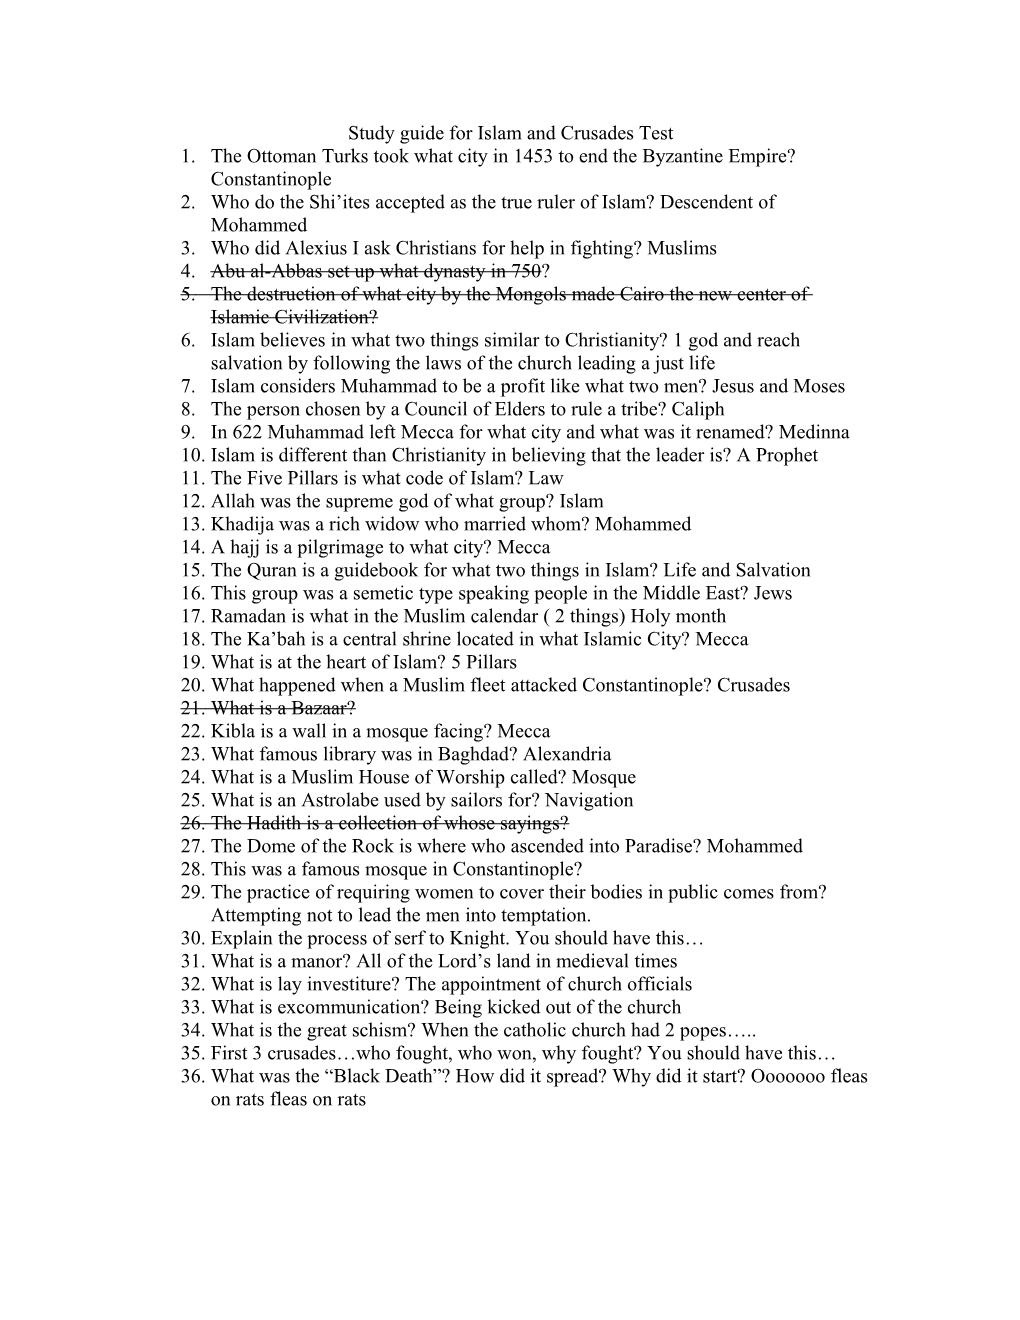 Study Guide for the Rise of Islam and Arab Empires Quiz